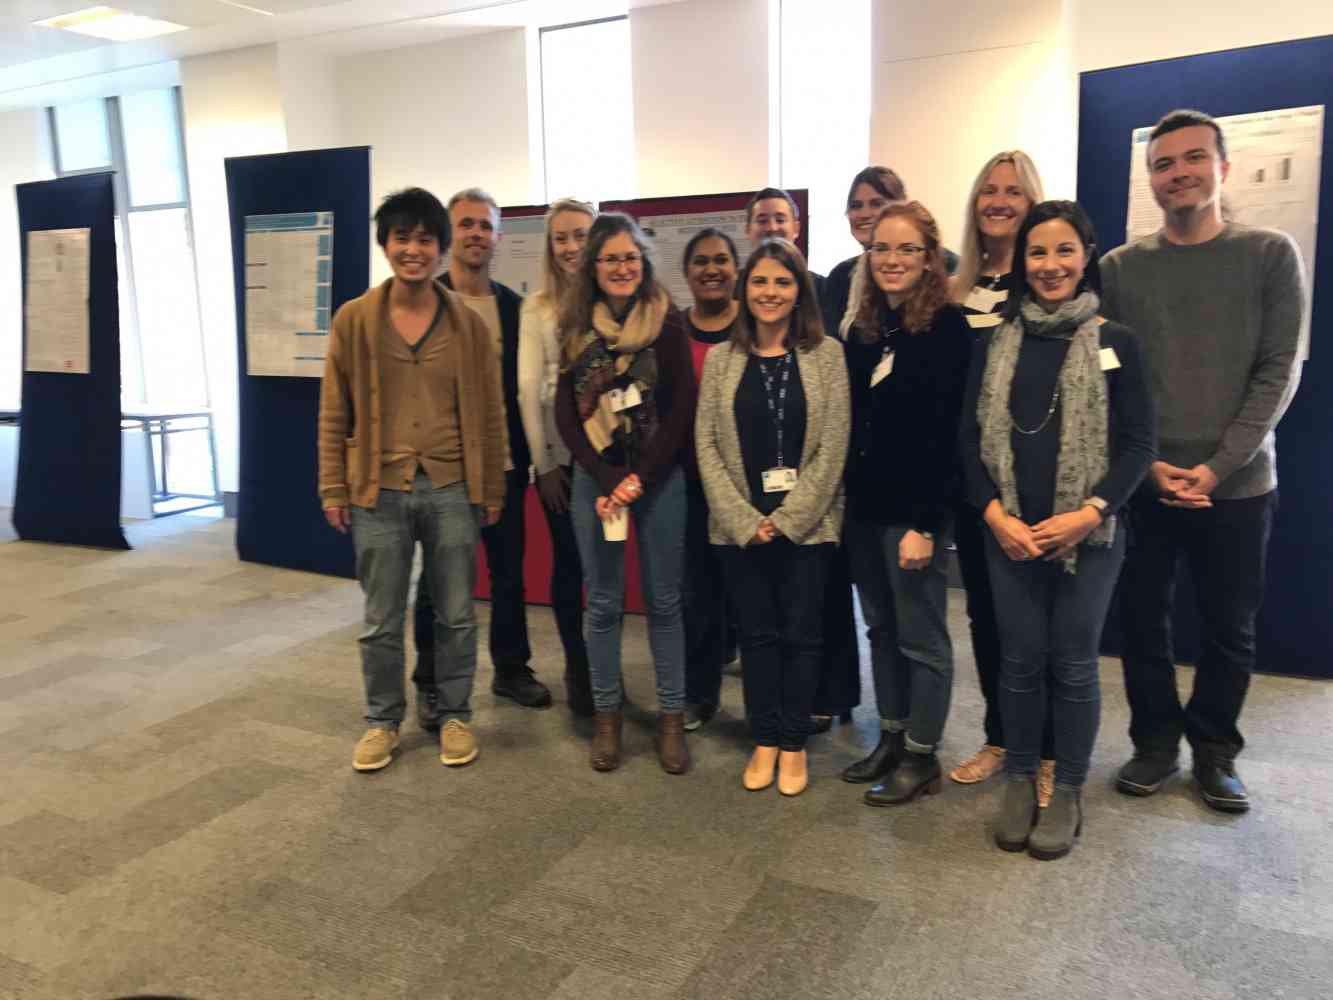 Postgraduate Research Poster Event - Annual event where postgraduate students present their research as part of the dissertation module. Wearing jeans for genes day to raise awareness of genetic disorders